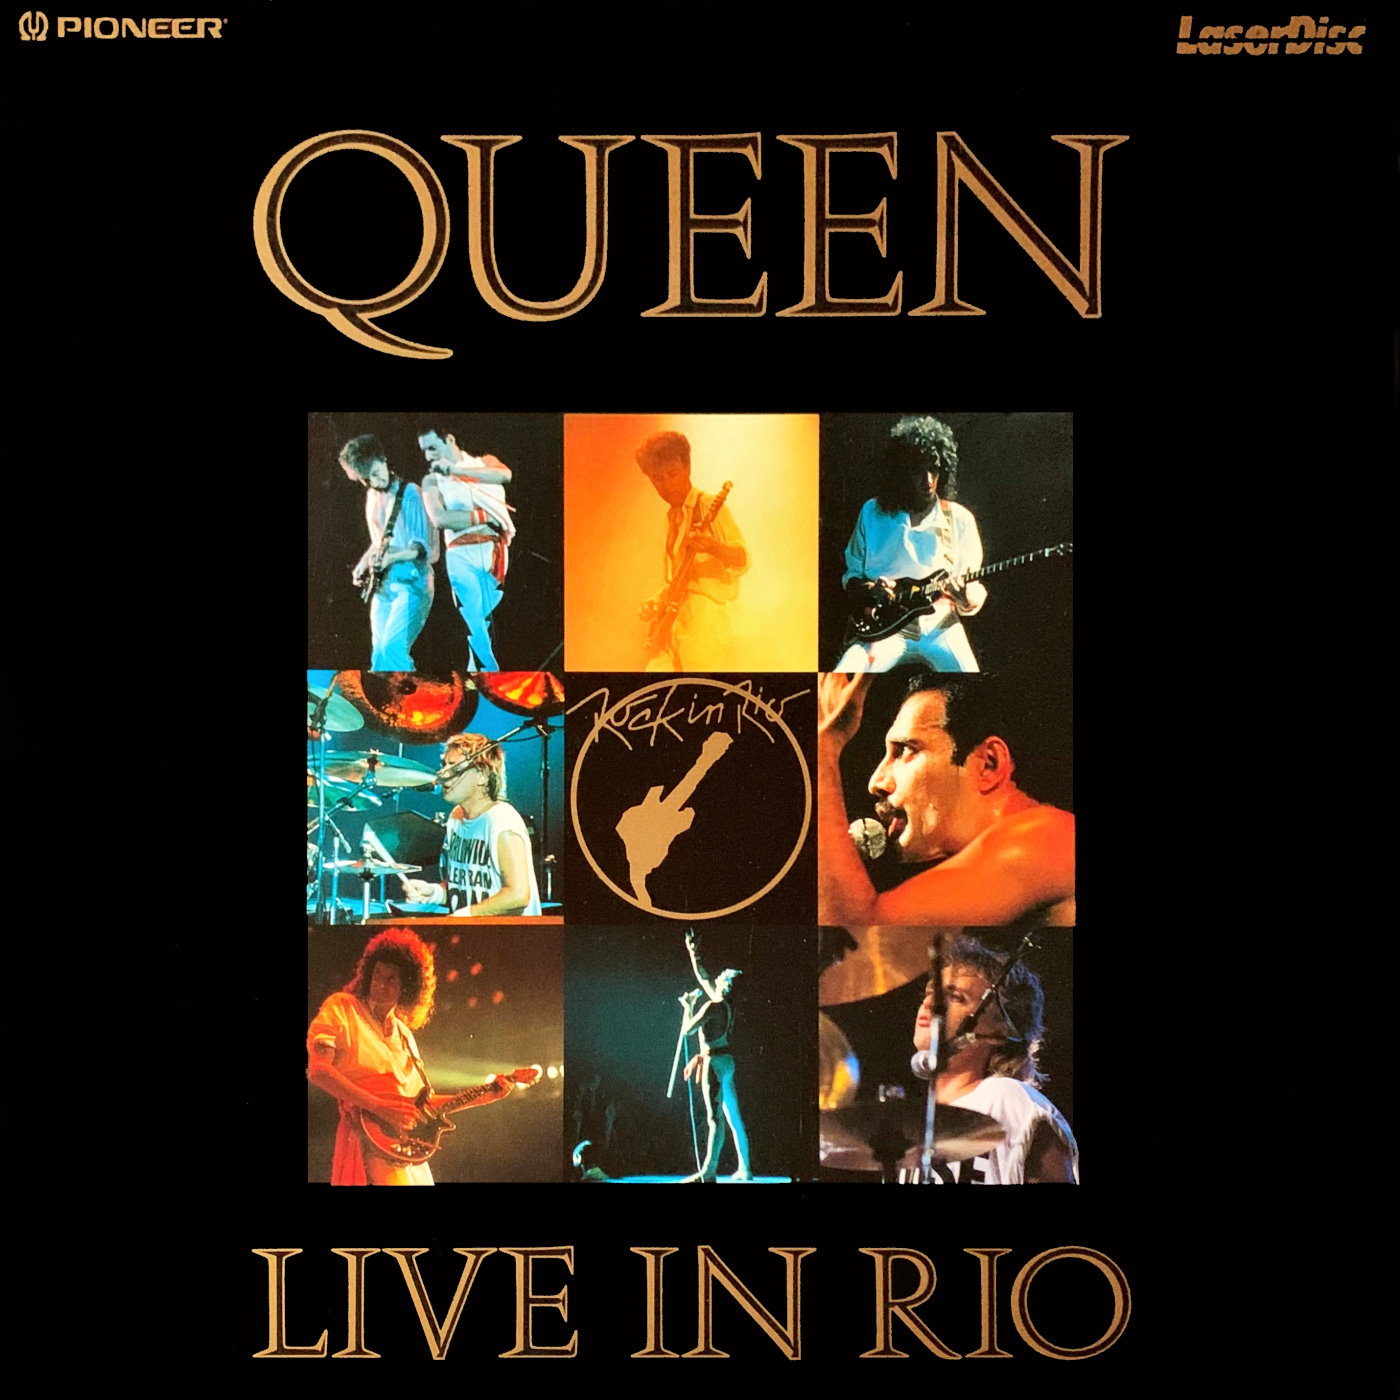 Cover - Queen - Live in Rio.jpg